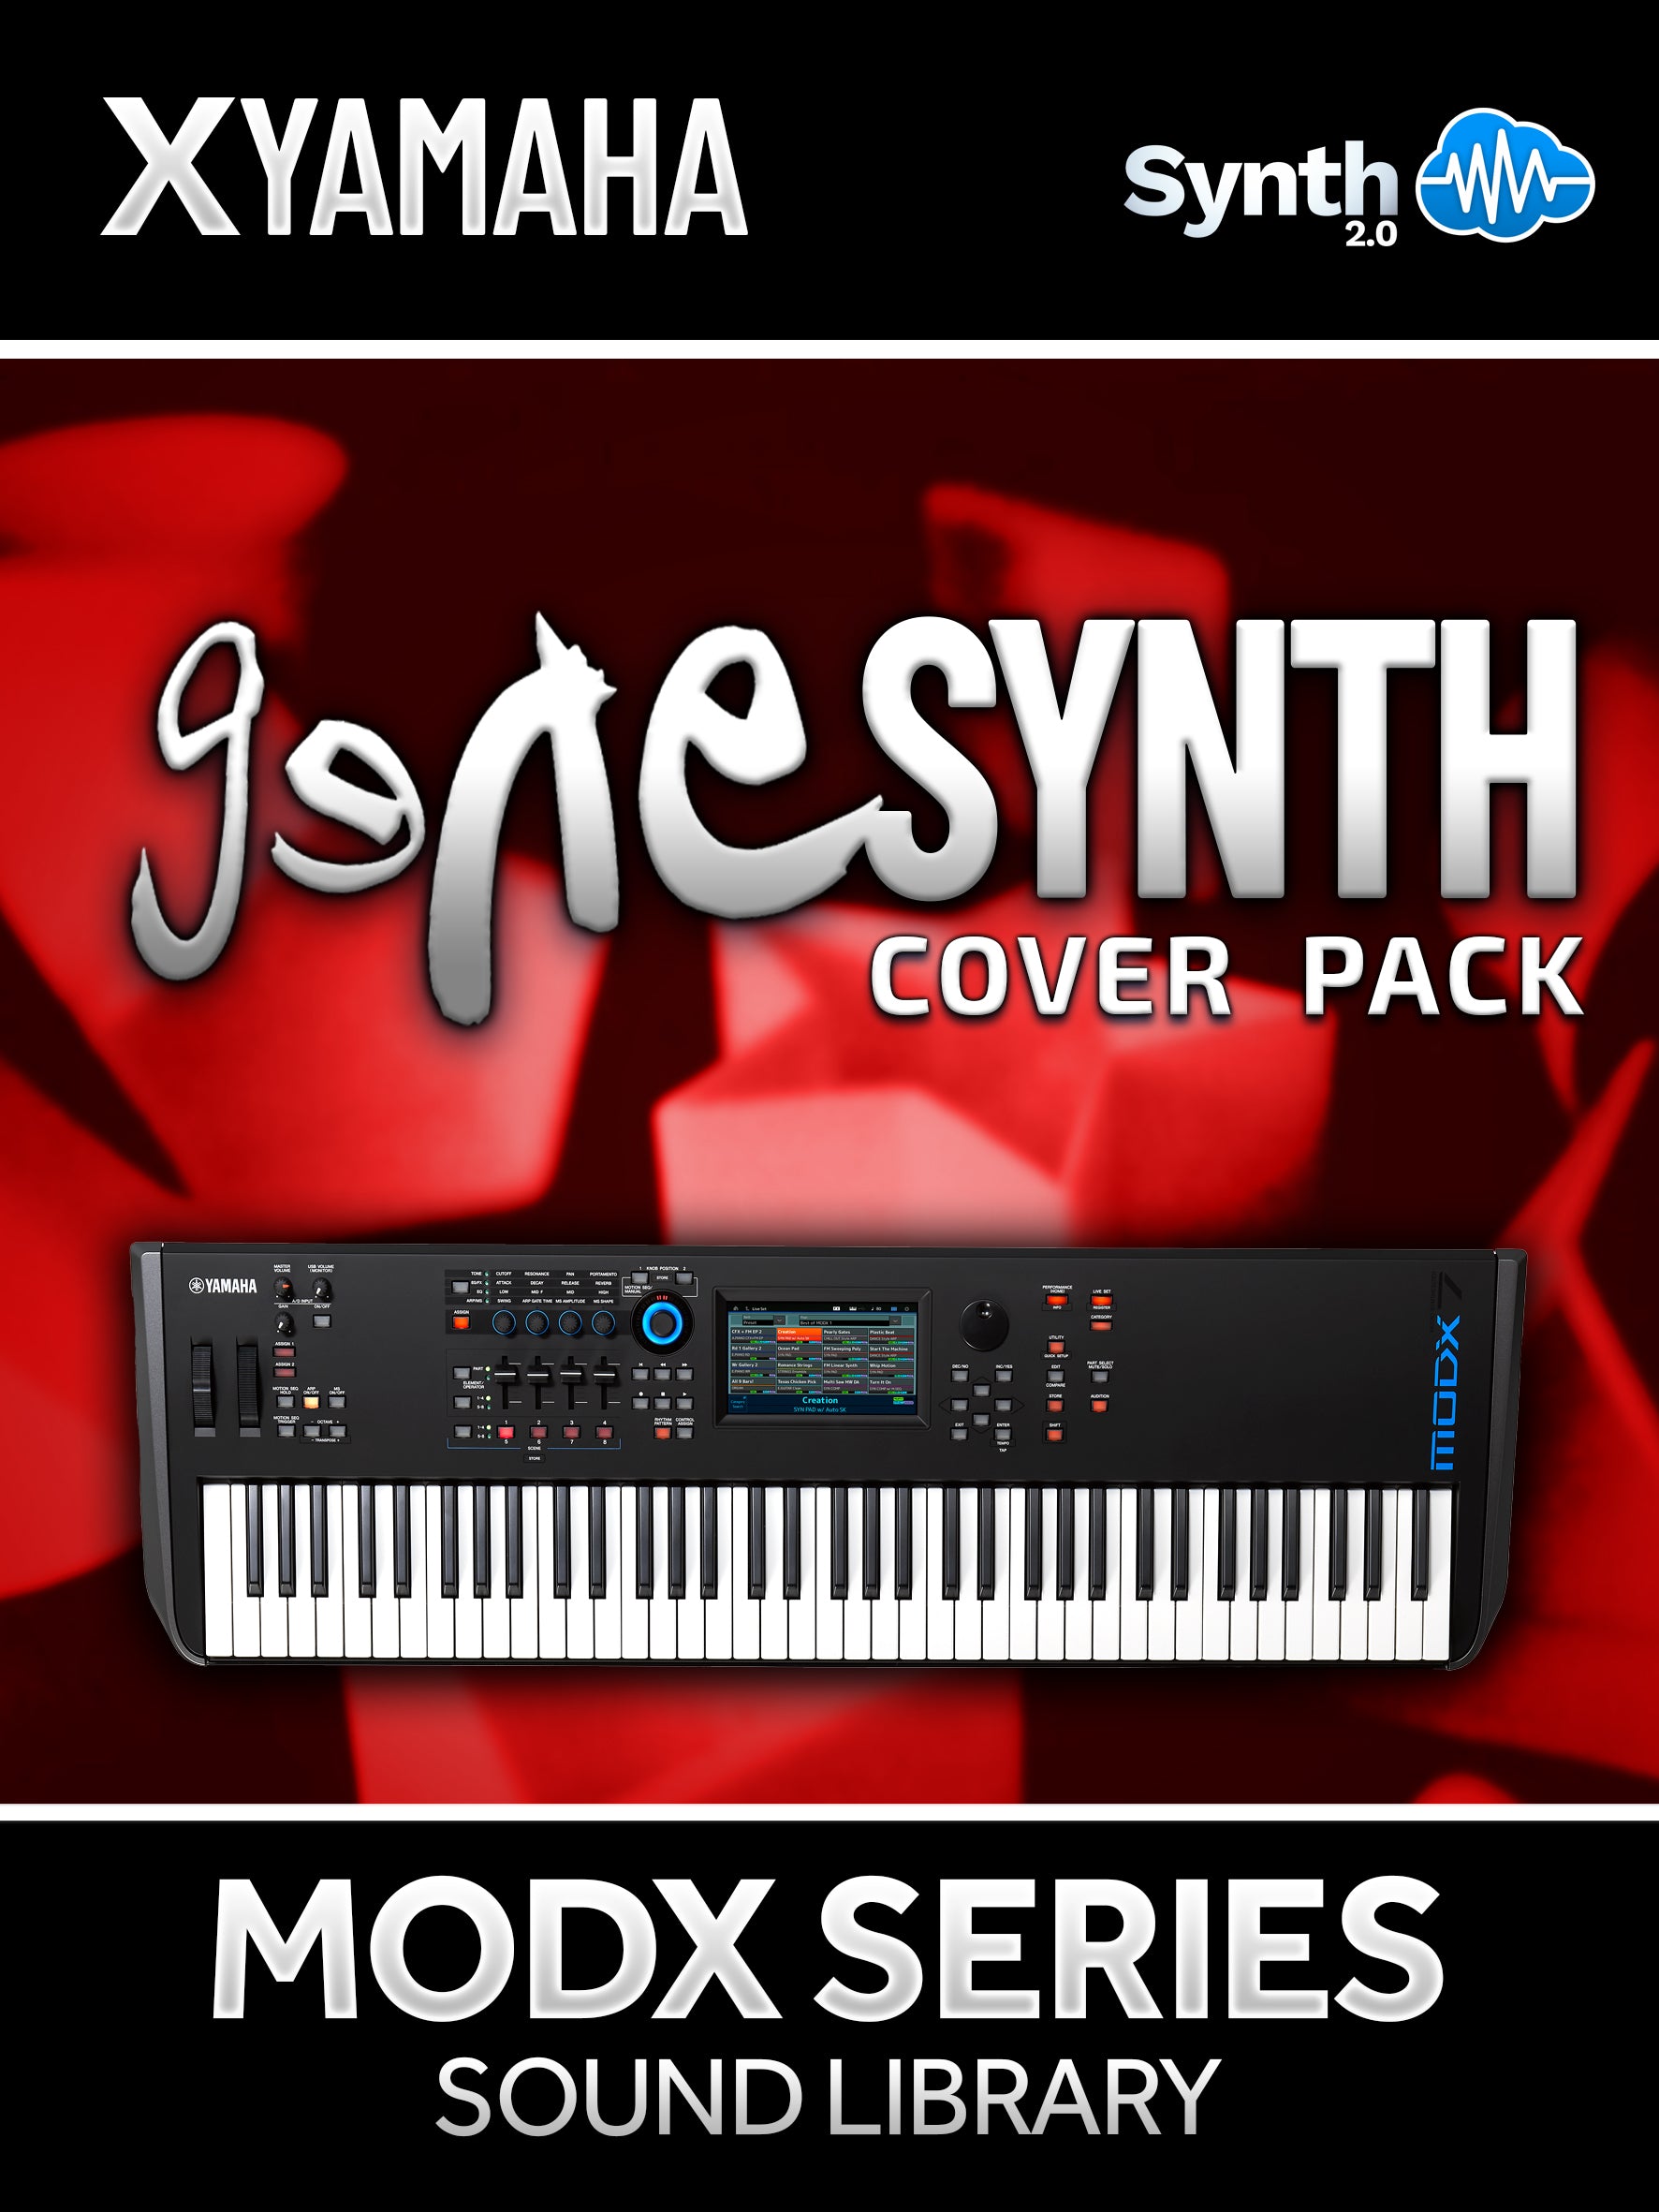 SCL217 - Genesynth Cover Pack - Yamaha MODX / MODX+ ( 10 presets )